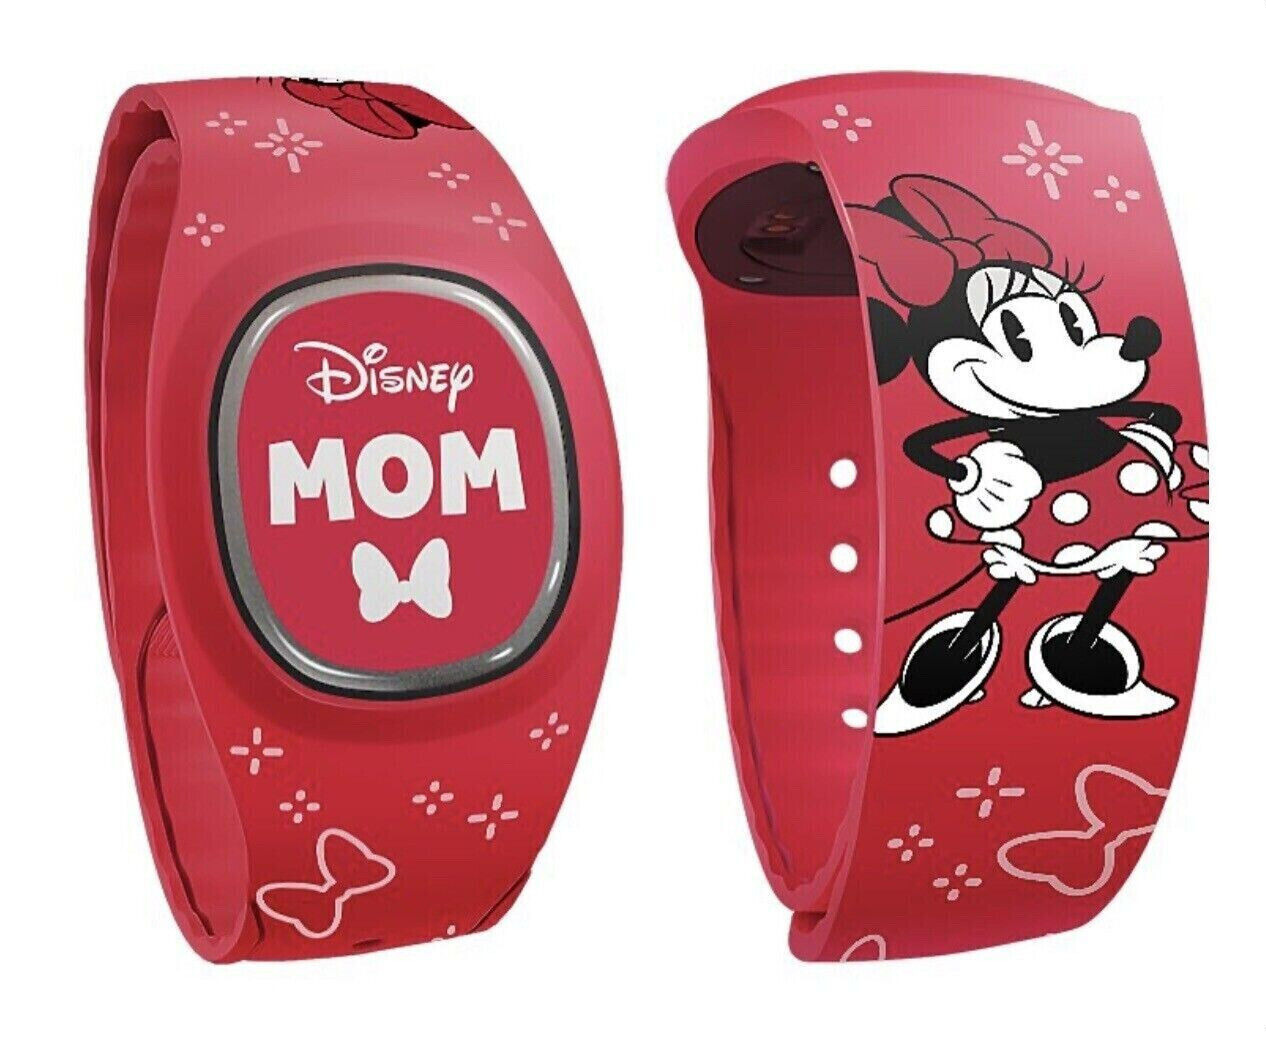 Disney Parks Magic Band Plus + Disney Mom Minnie Mouse Bow Red - New Unlinked